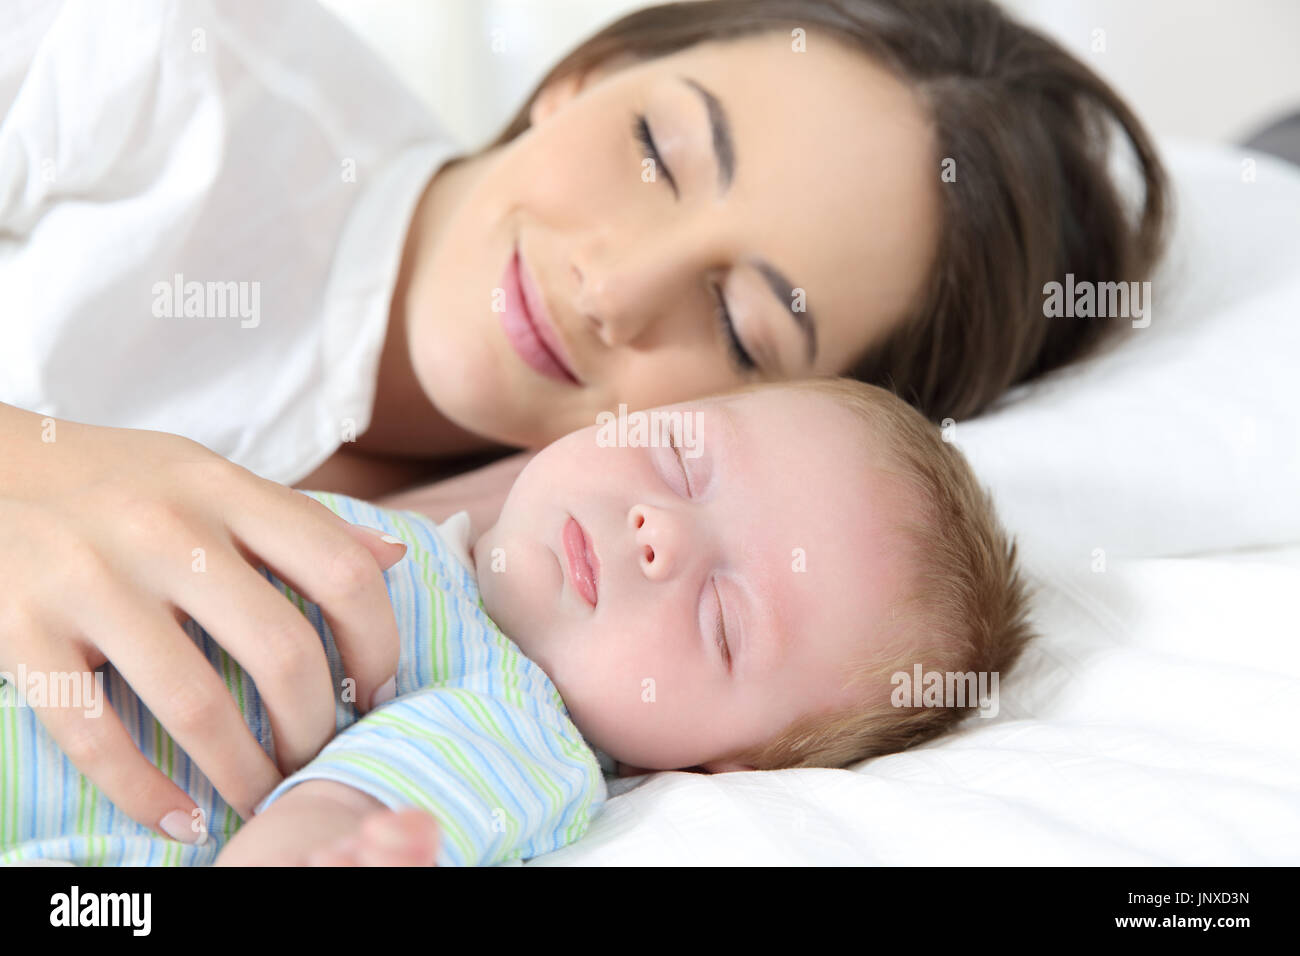 Portrait of a happy mother and baby sleeping together on bed Stock Photo